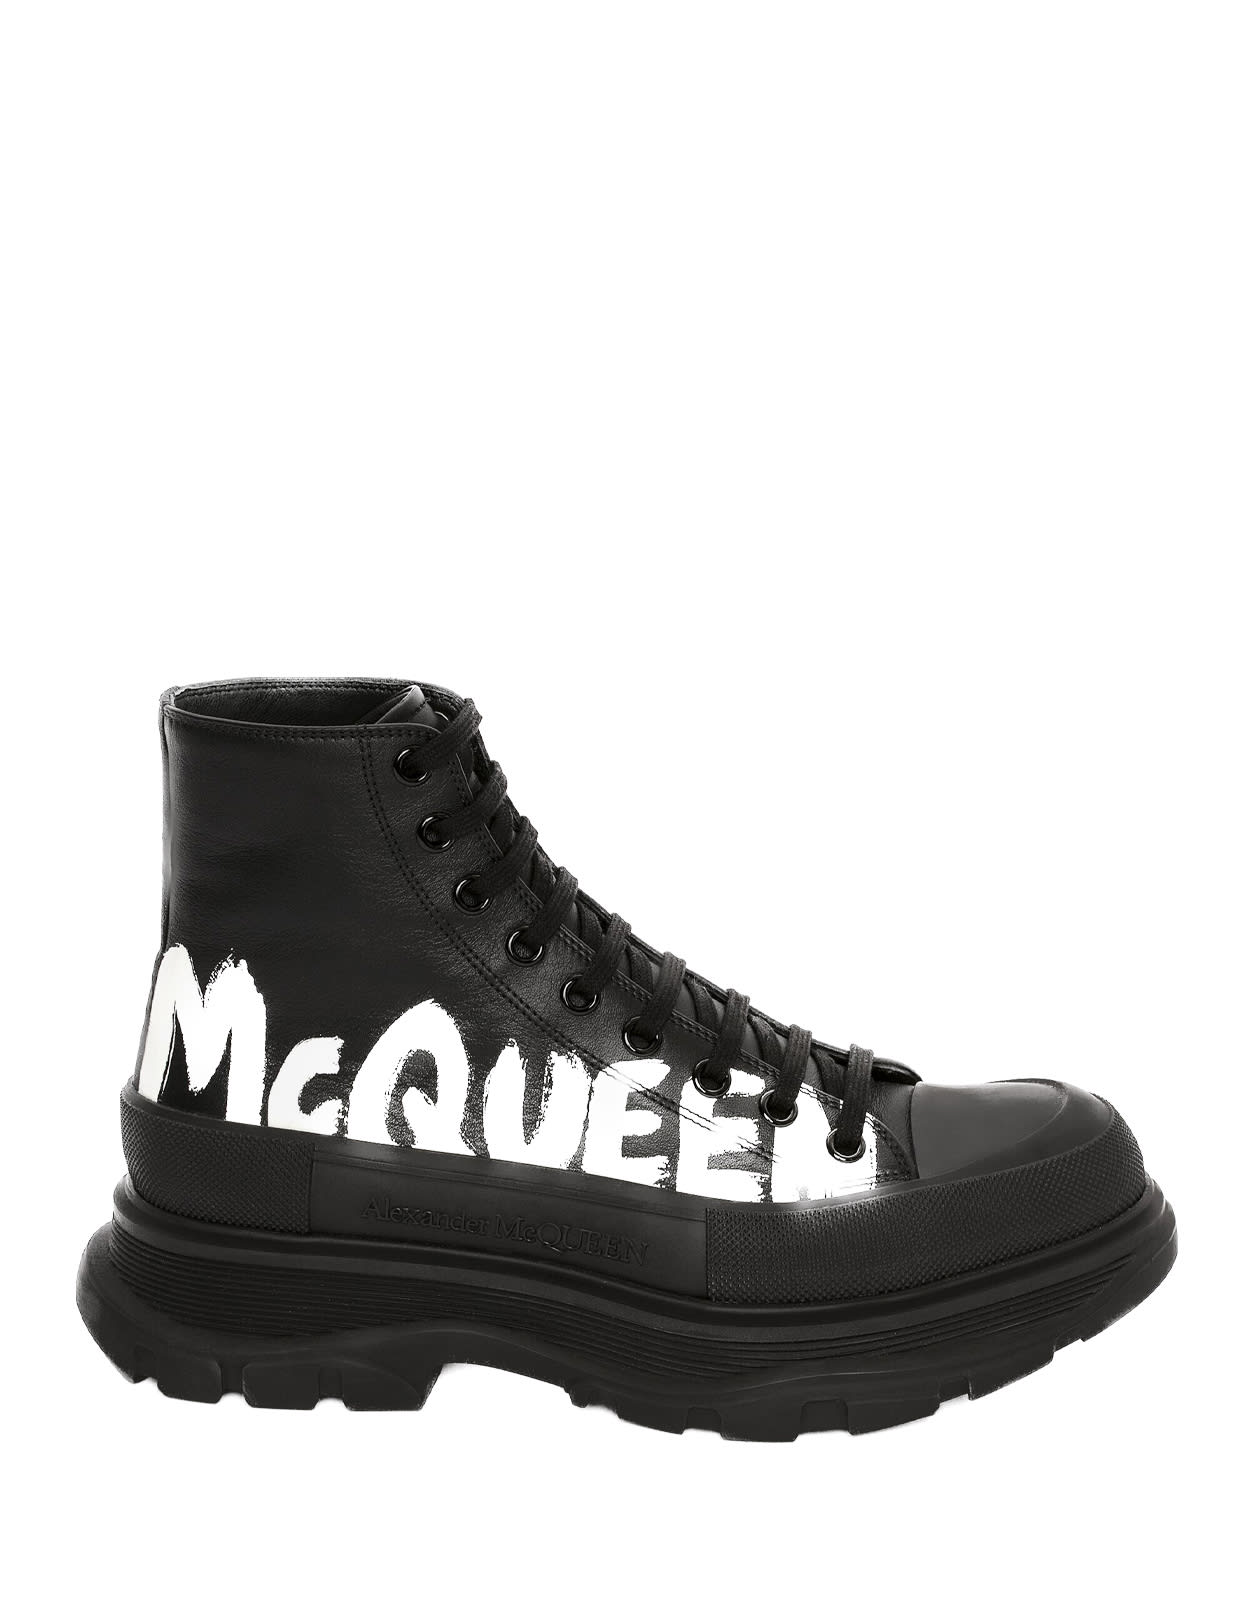 Alexander Mcqueen Black And White Tread Slick Ankle Boots